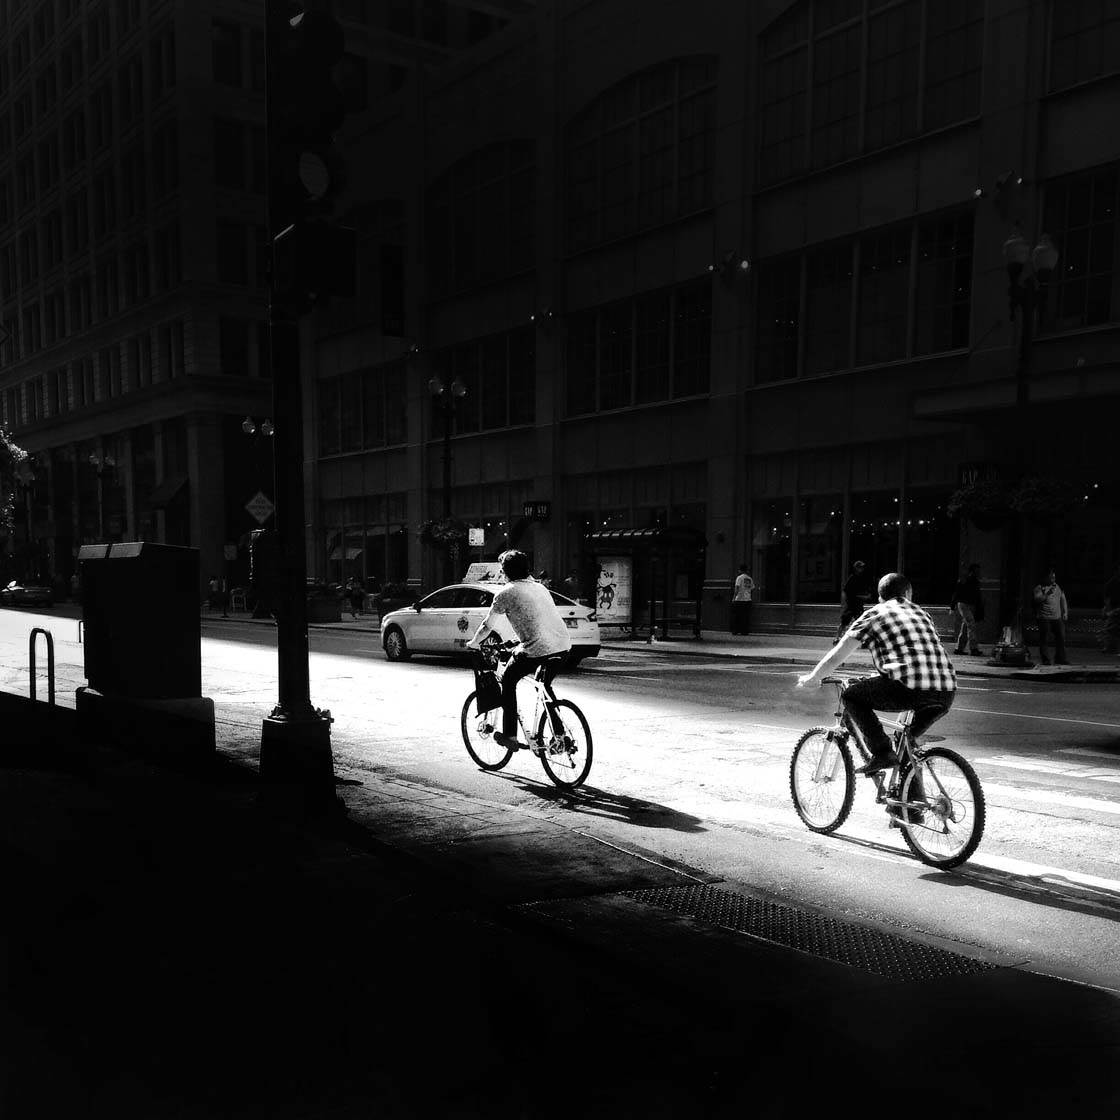 iPhone Street Photography Tips 19